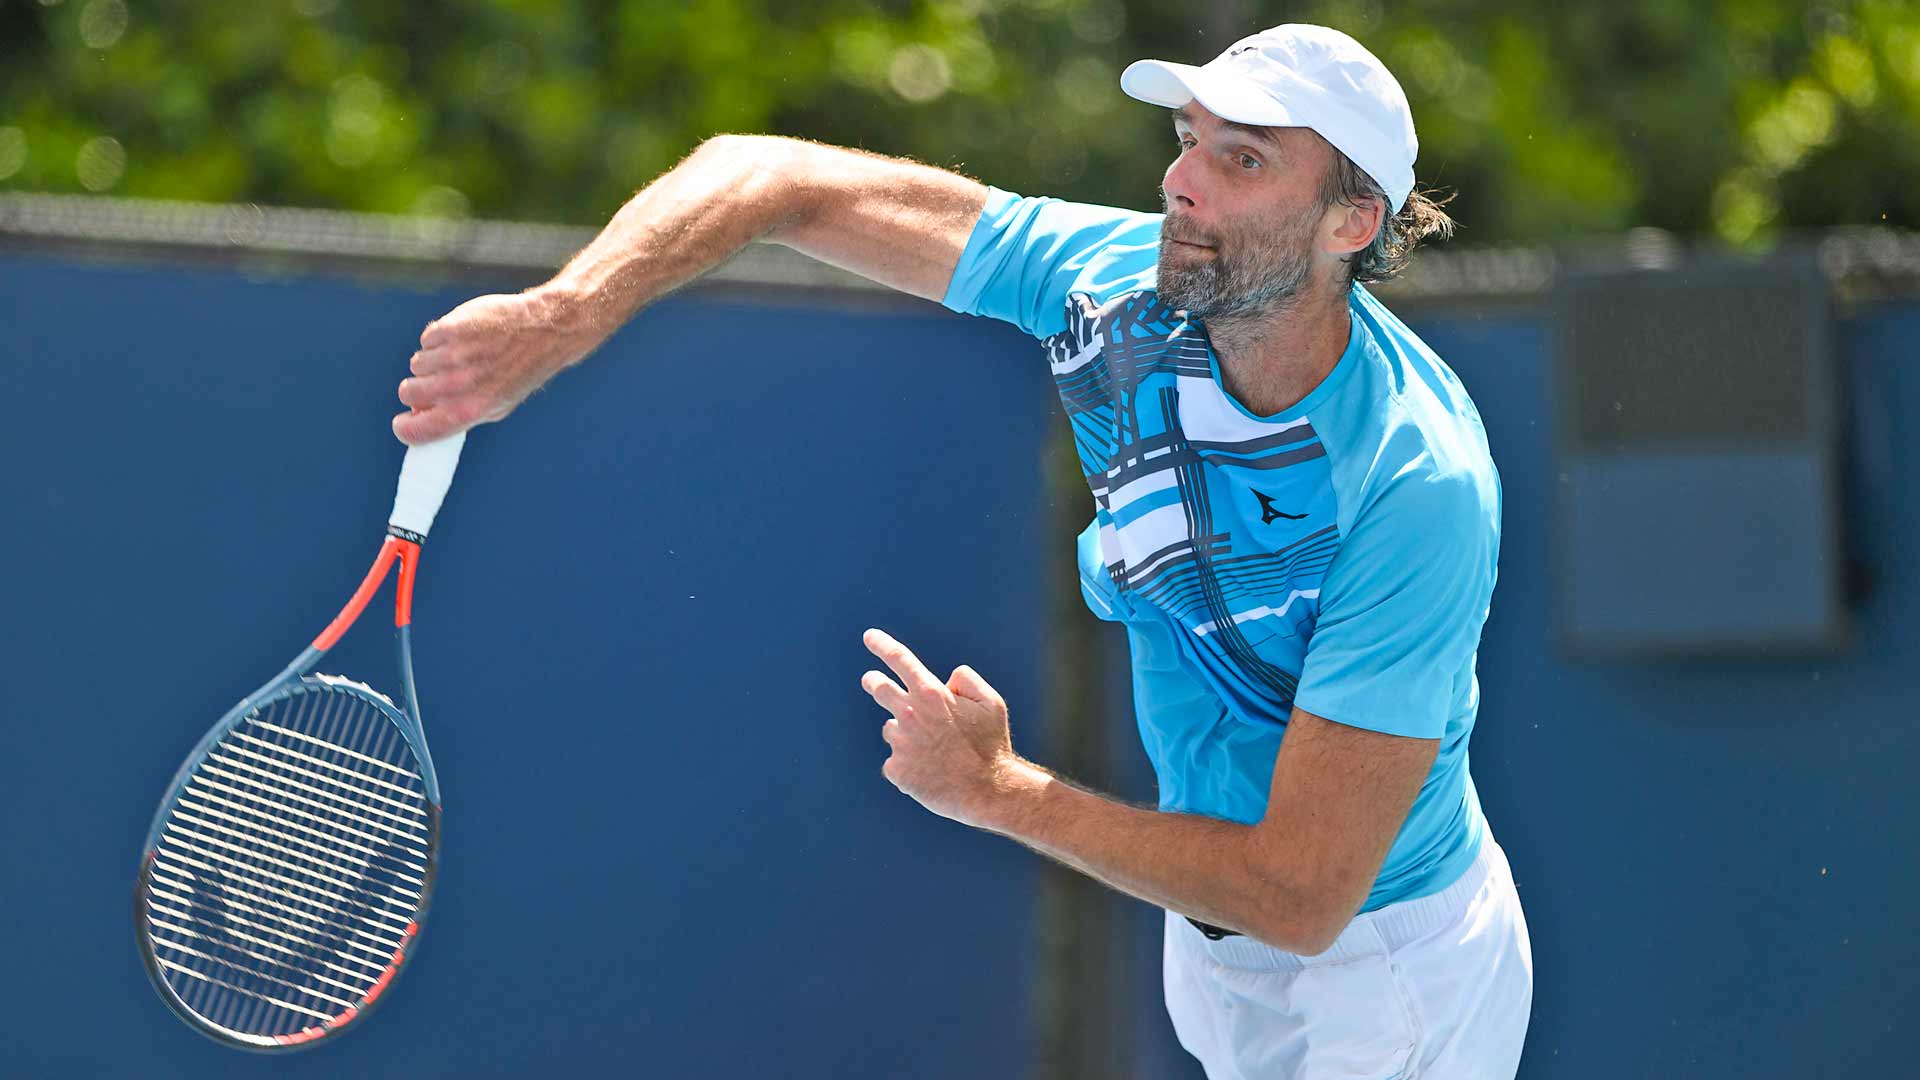 Ivo Karlovic reached a career high of No. 14 in the Pepperstone ATP Rankings.